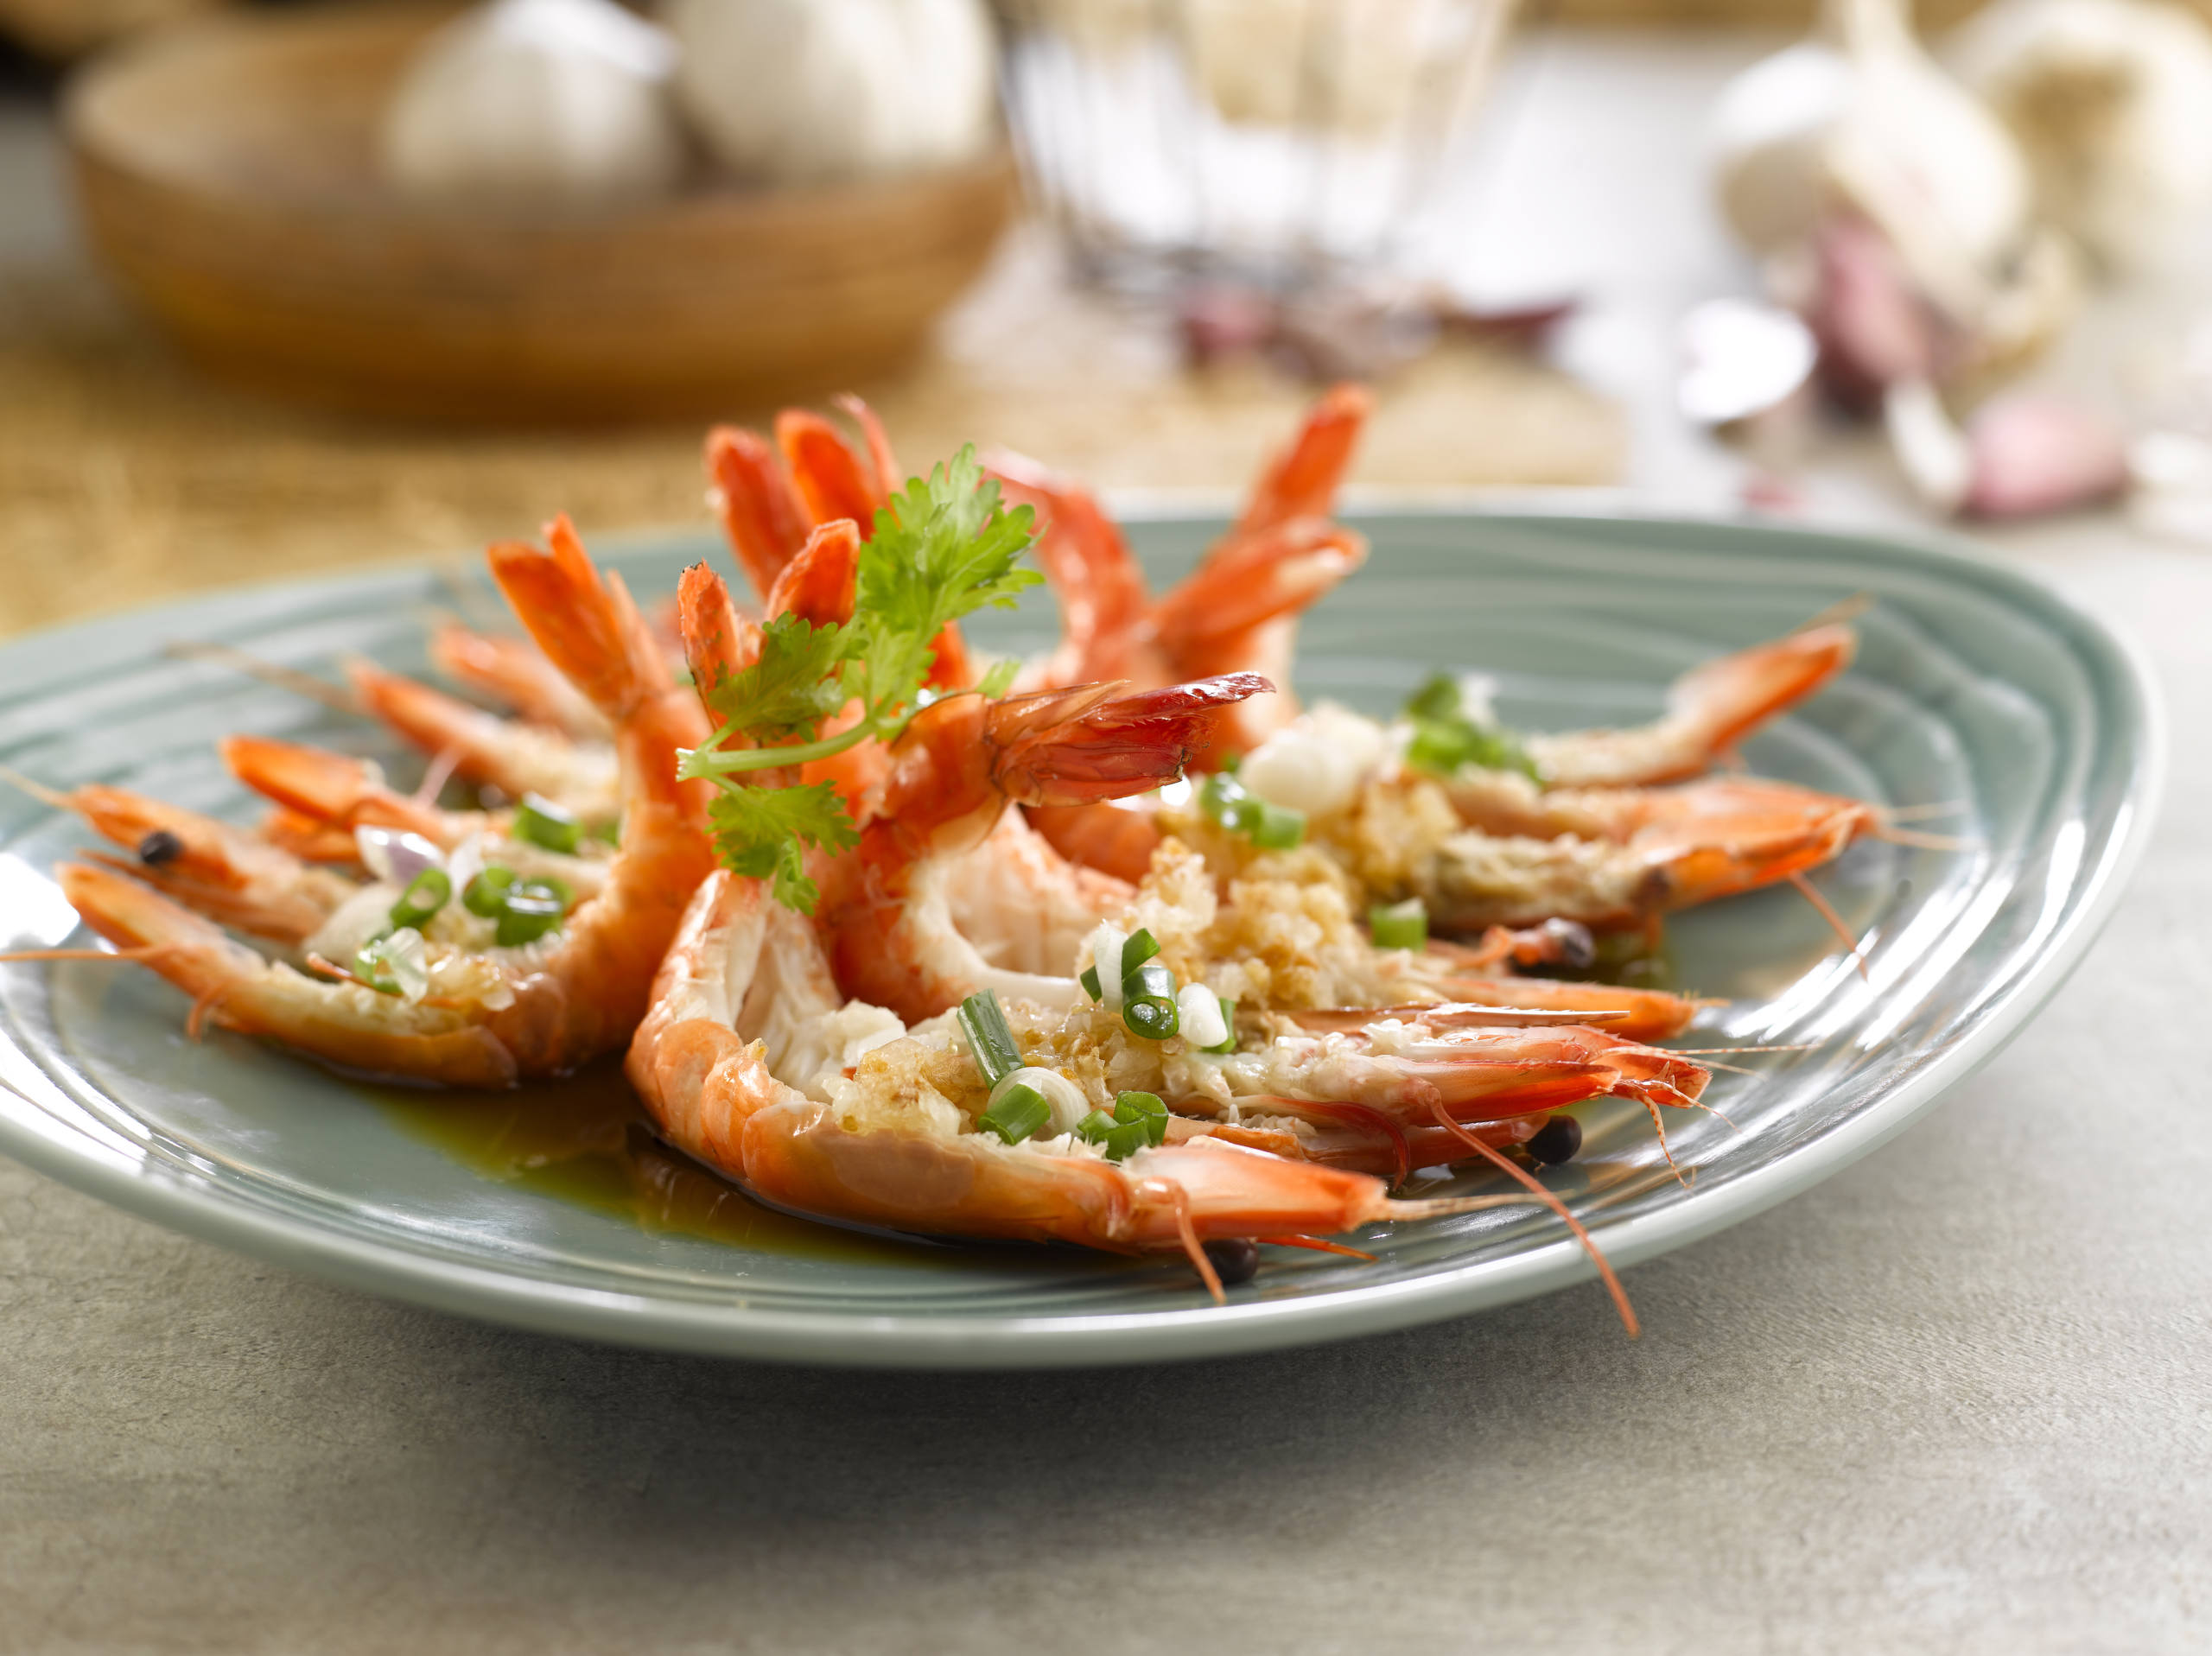 Crystal Jade Hong Kong Kitchen Live Prawn Steam with Garlic, delivered islandwide in Singapore powered by Oddle.